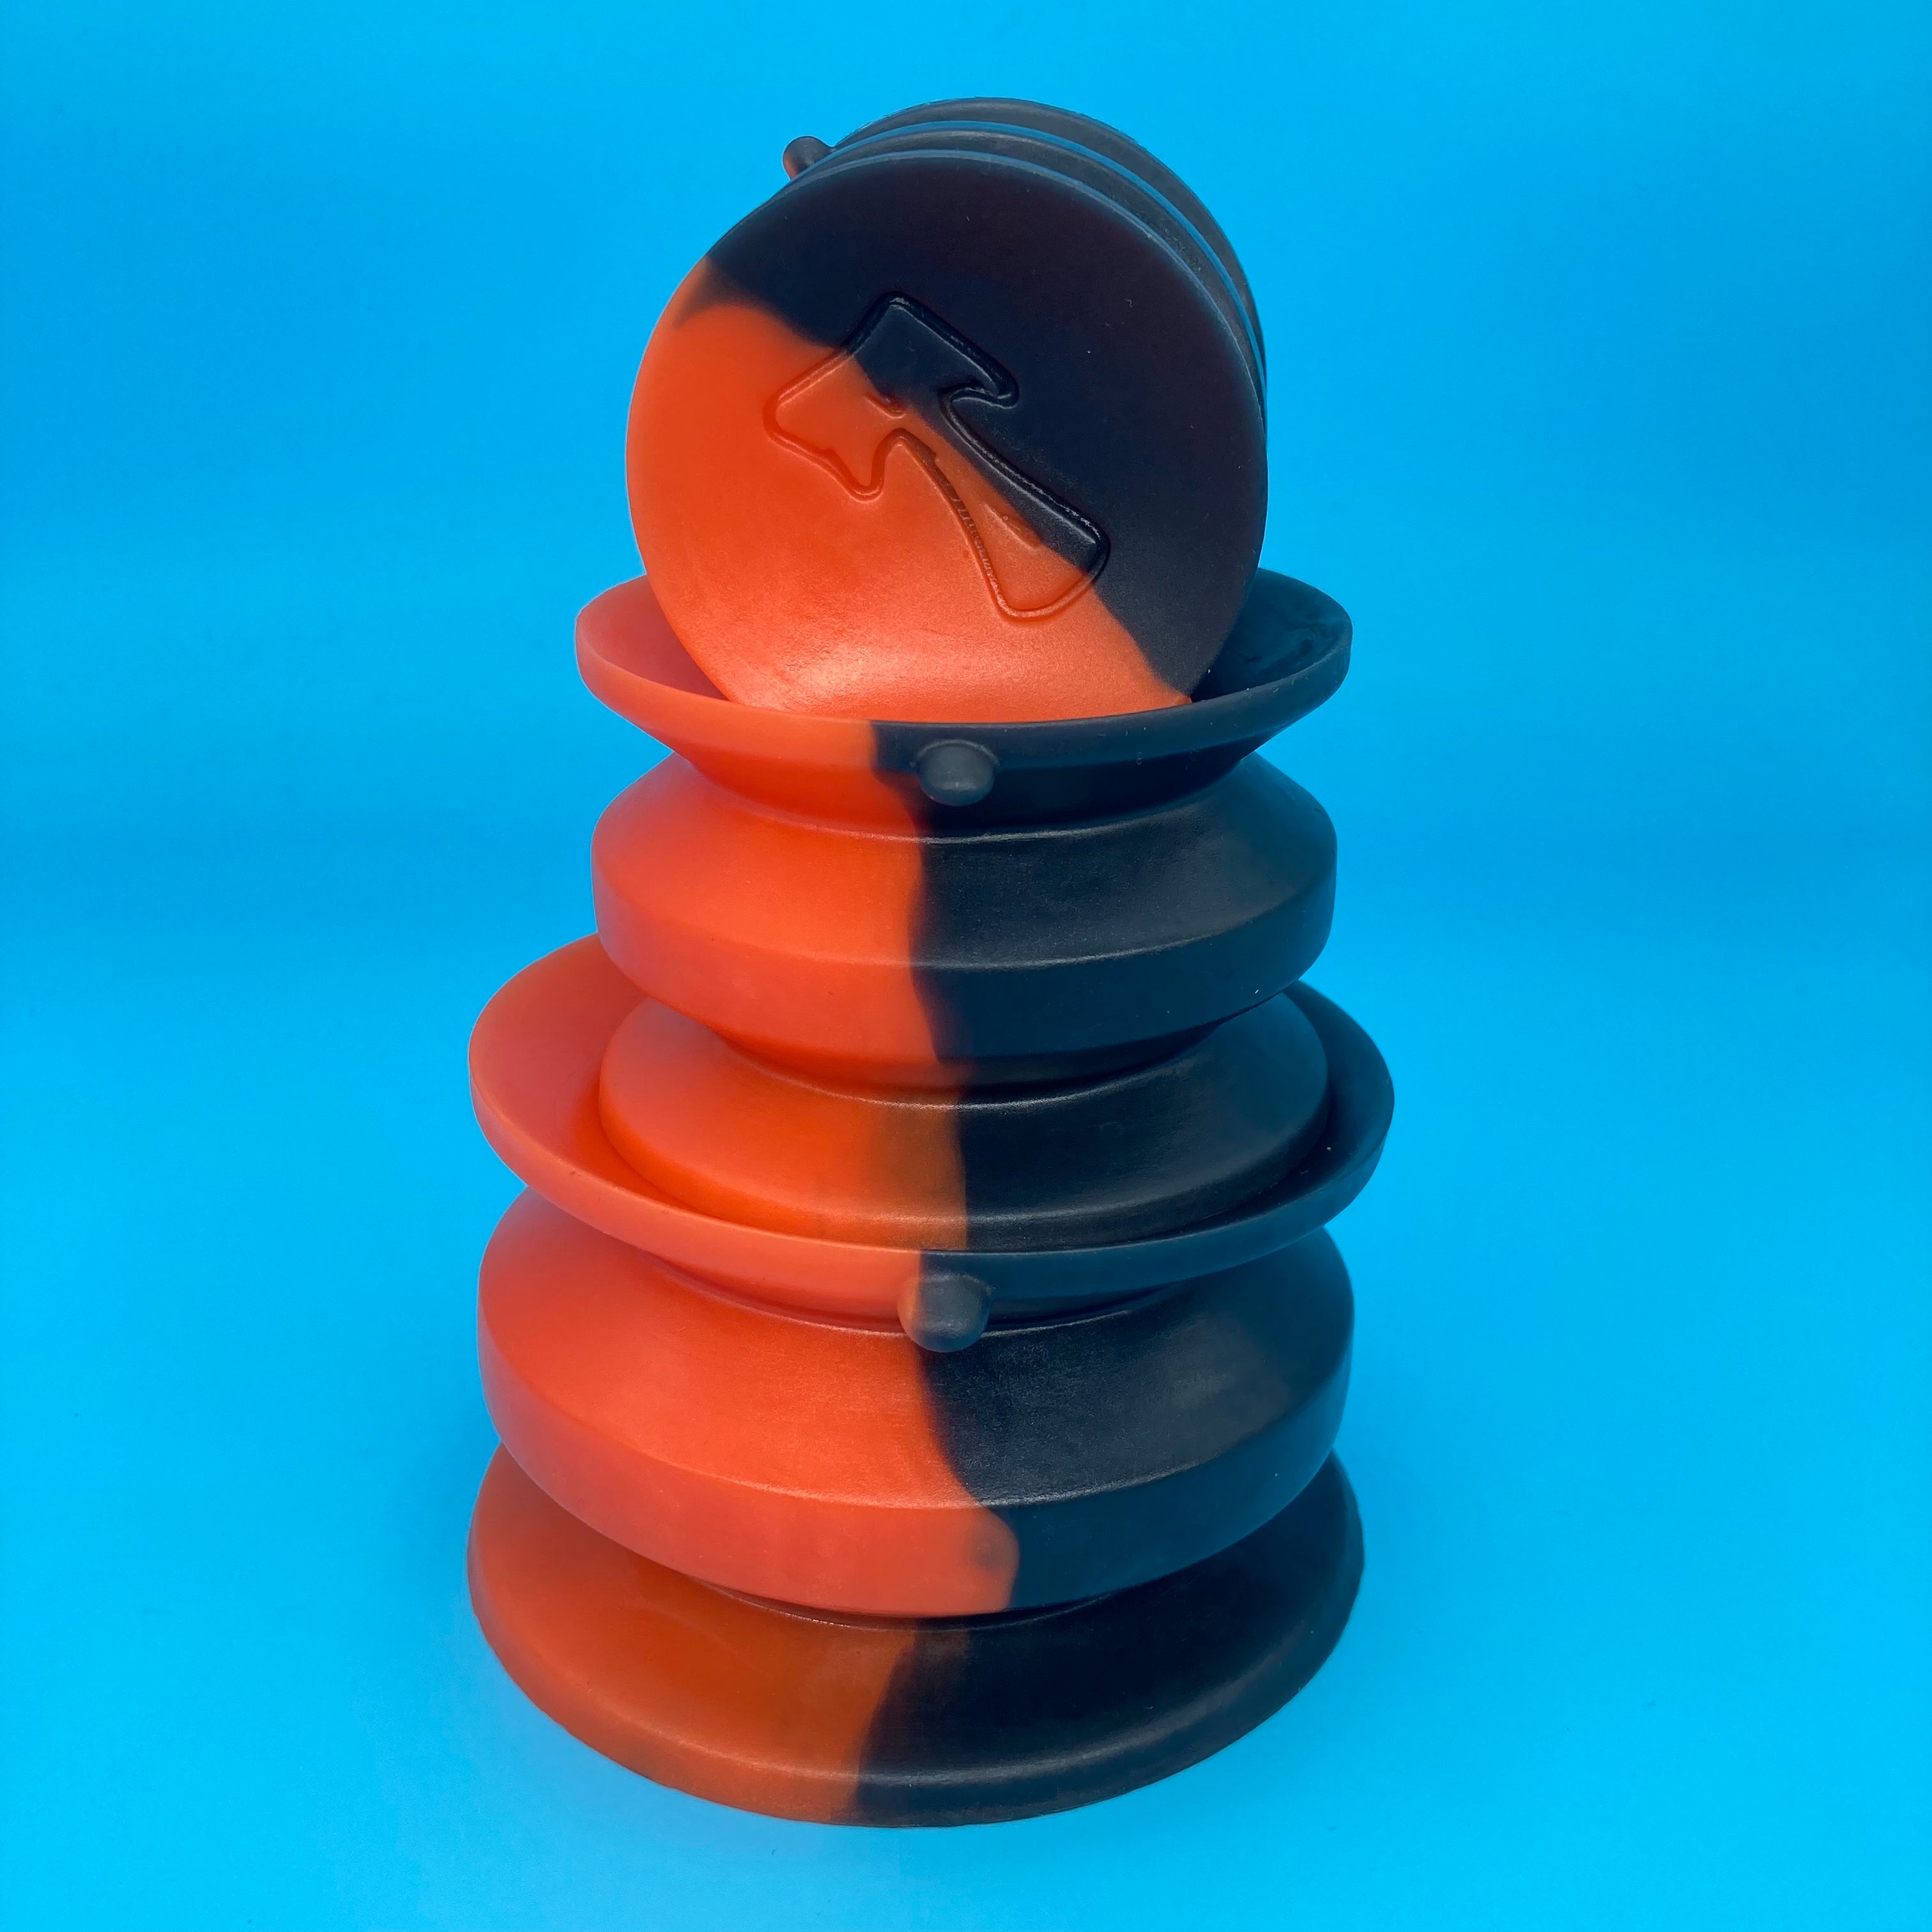 Tentickle double-sided suction cup